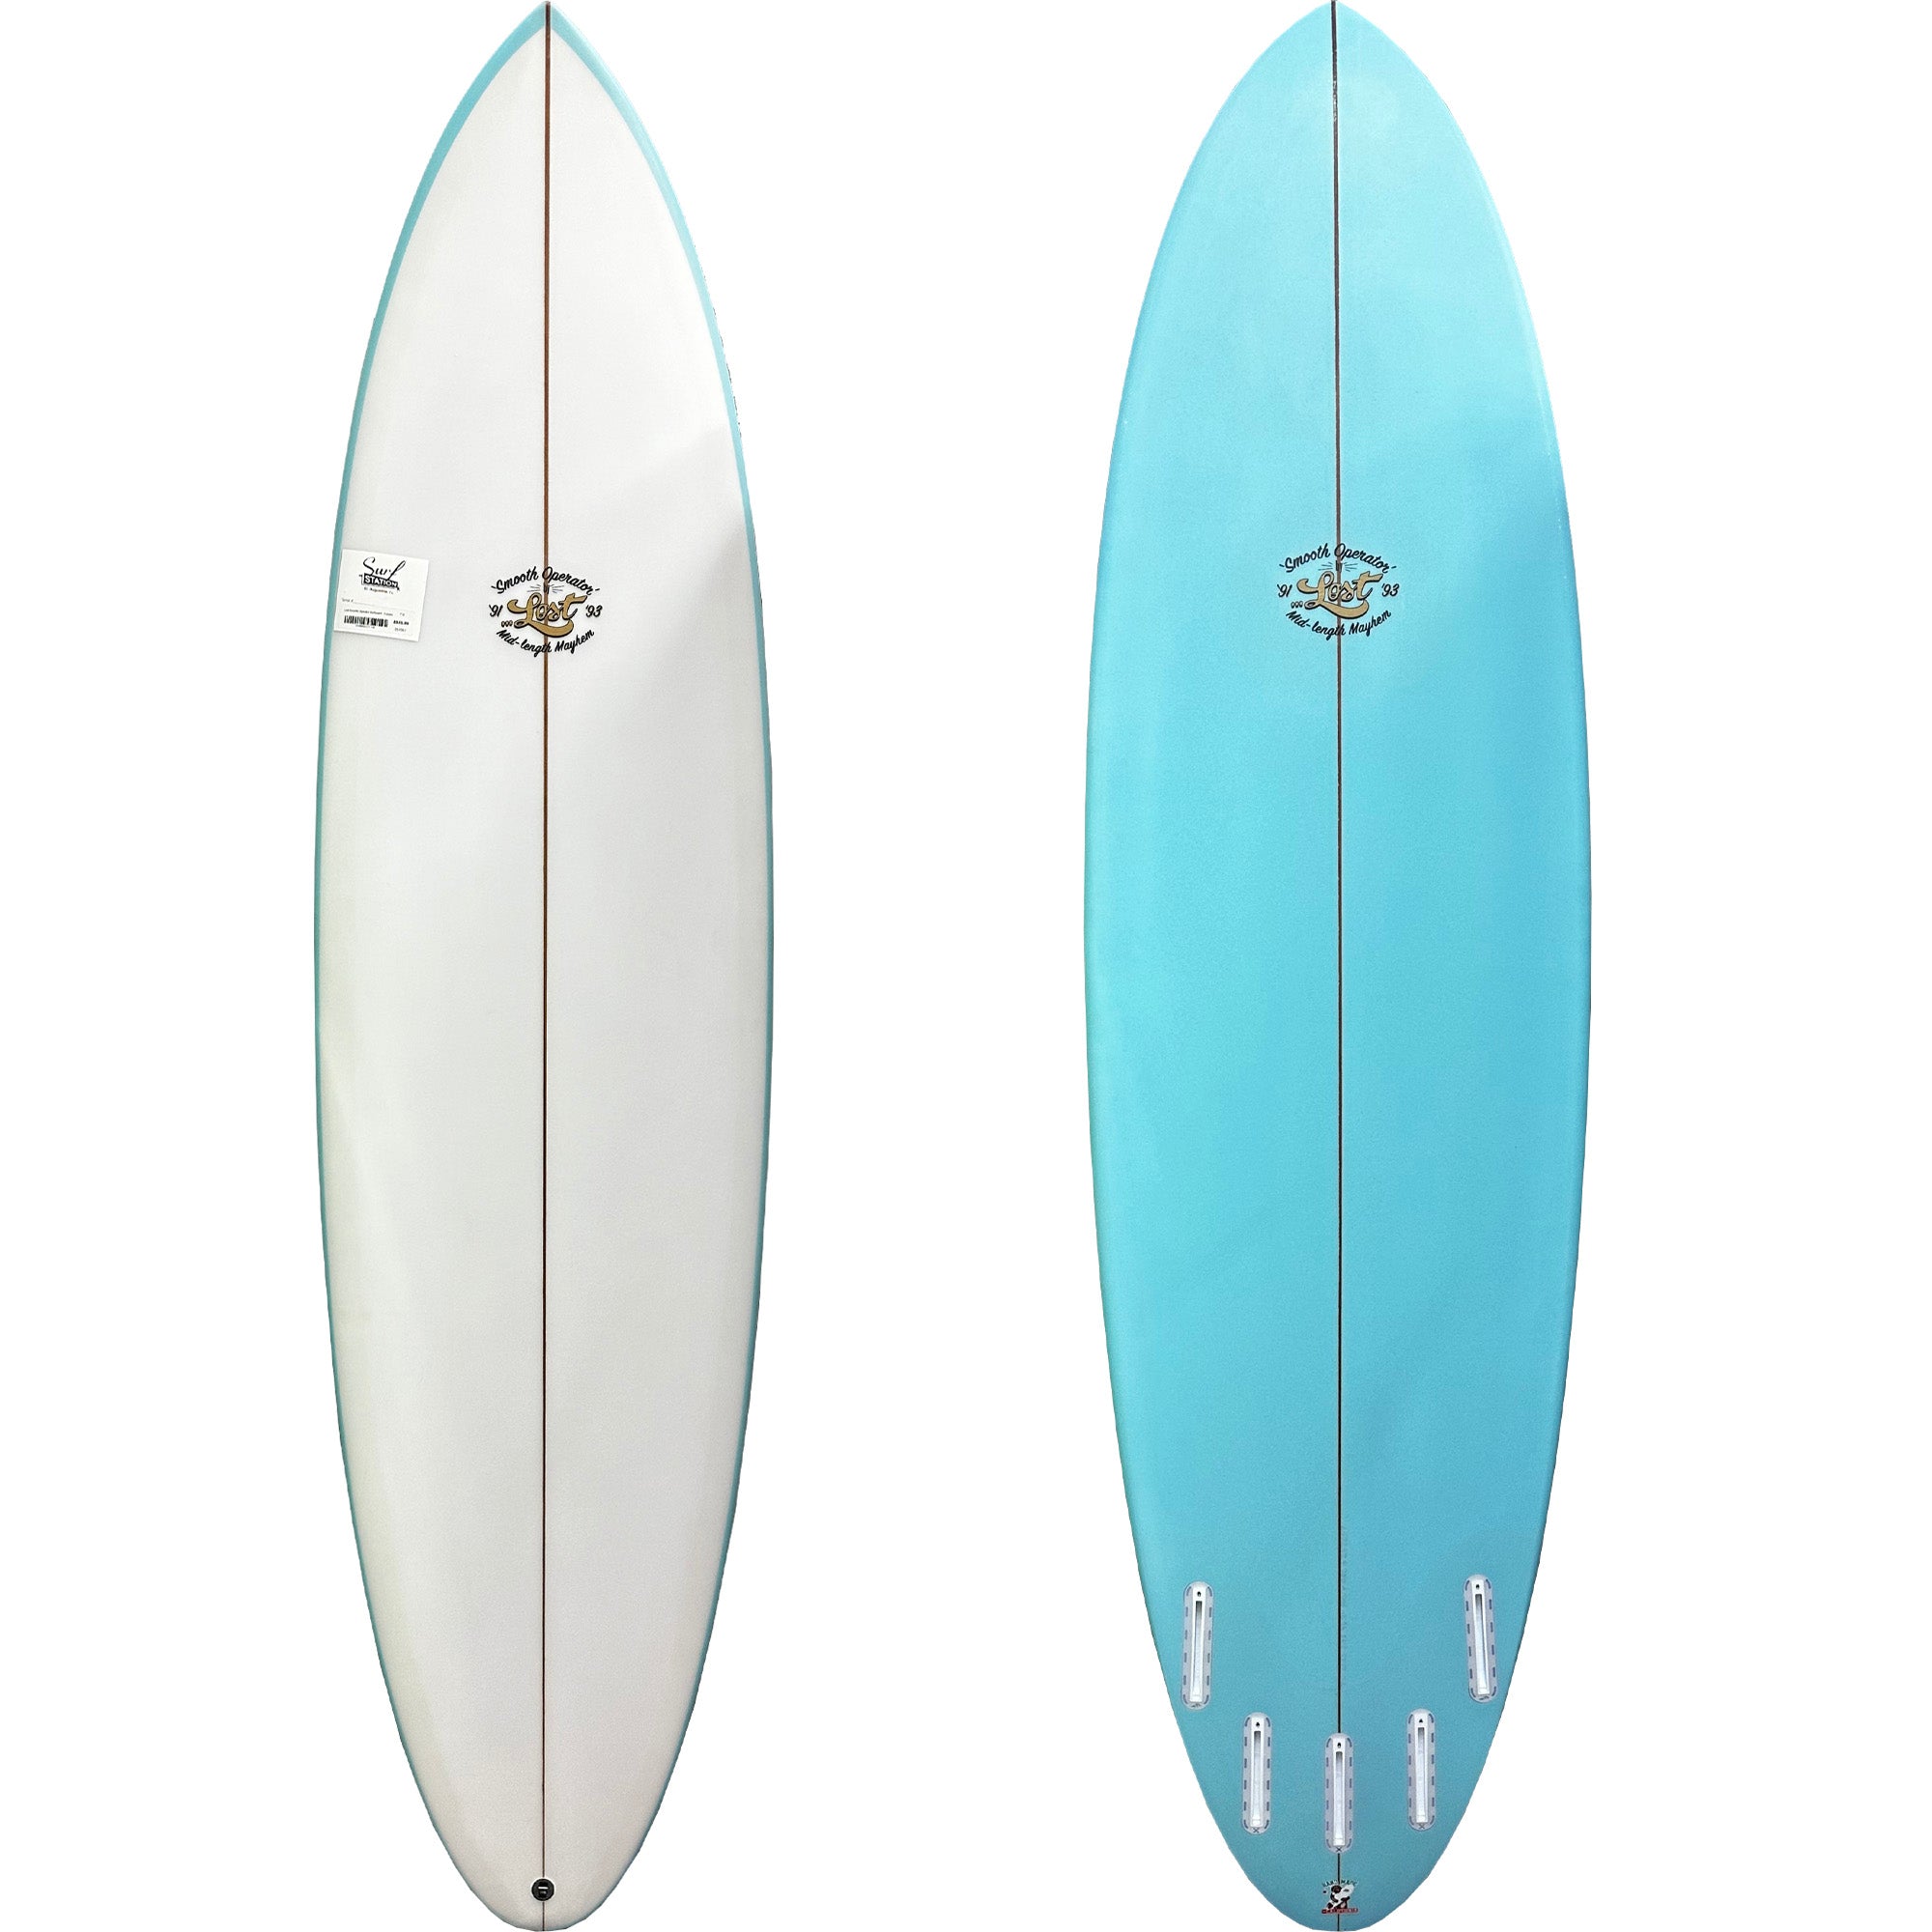 Lost Smooth Operator Surfboard - Futures